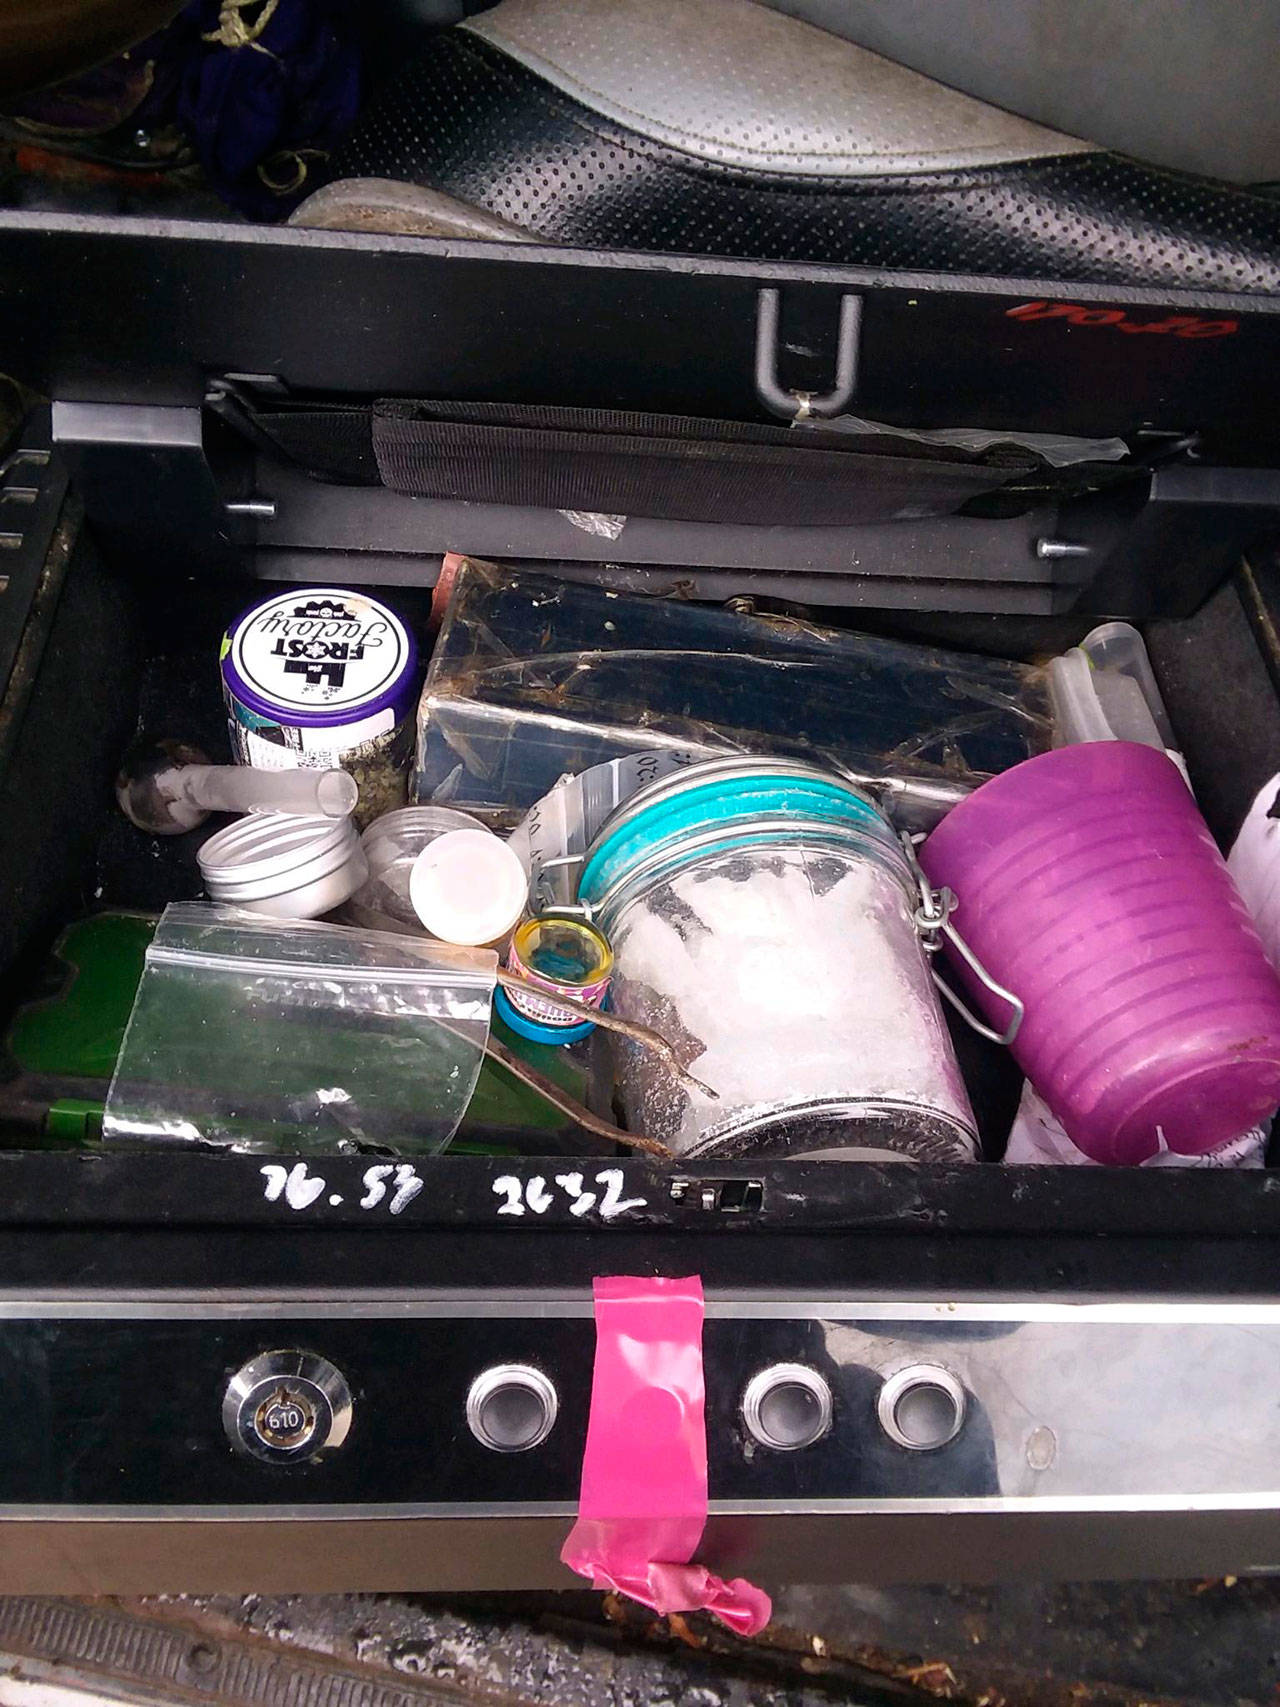 Authorities say they found drugs and drug paraphernalia in a lock box in Baylee B. Nelson’s truck. Photo courtesy of Clallam County Sheriff’s Office